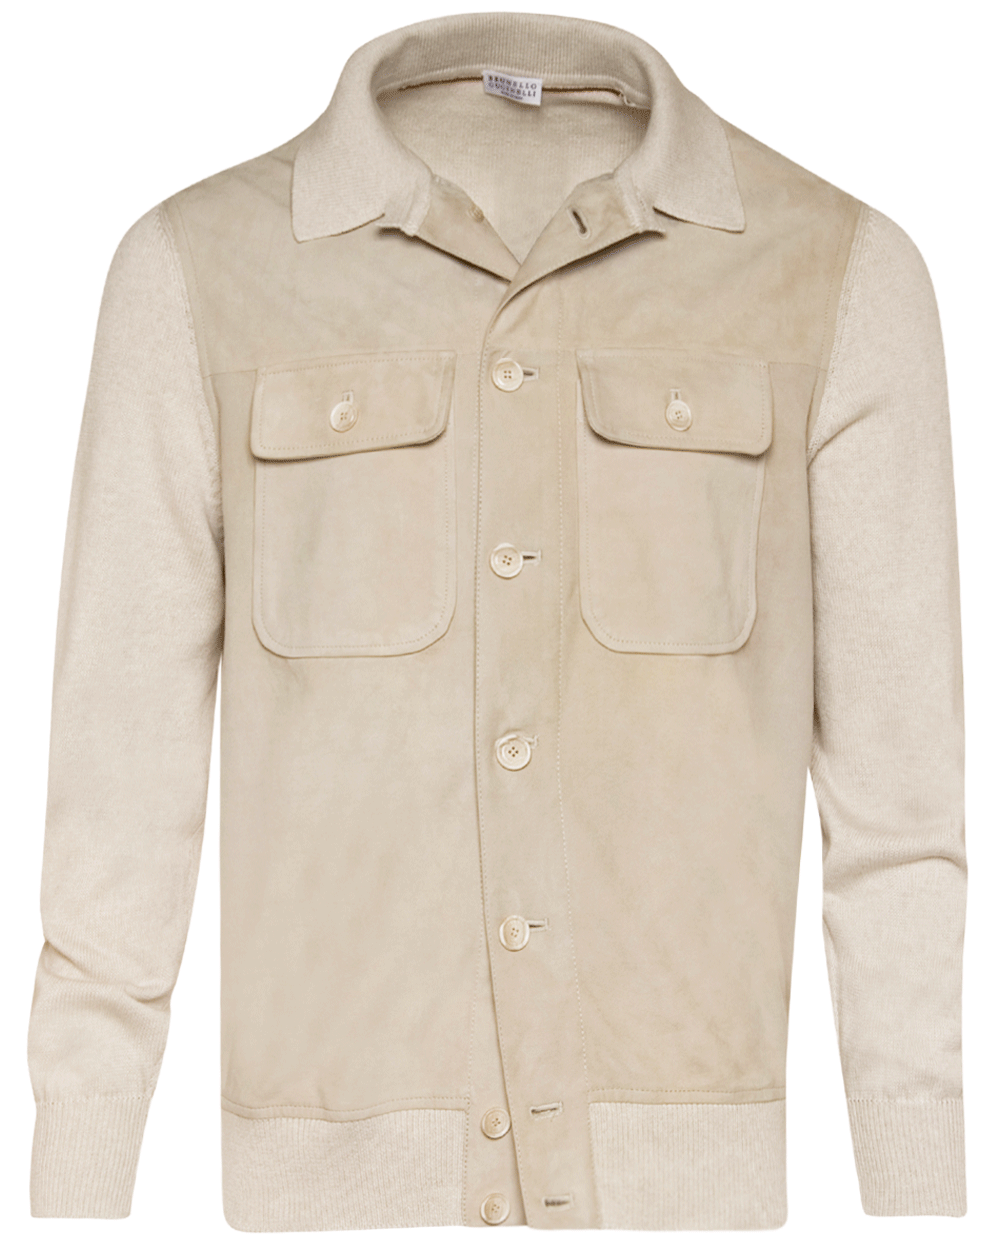 Beige Suede and Cotton Knit Shirt Jacket